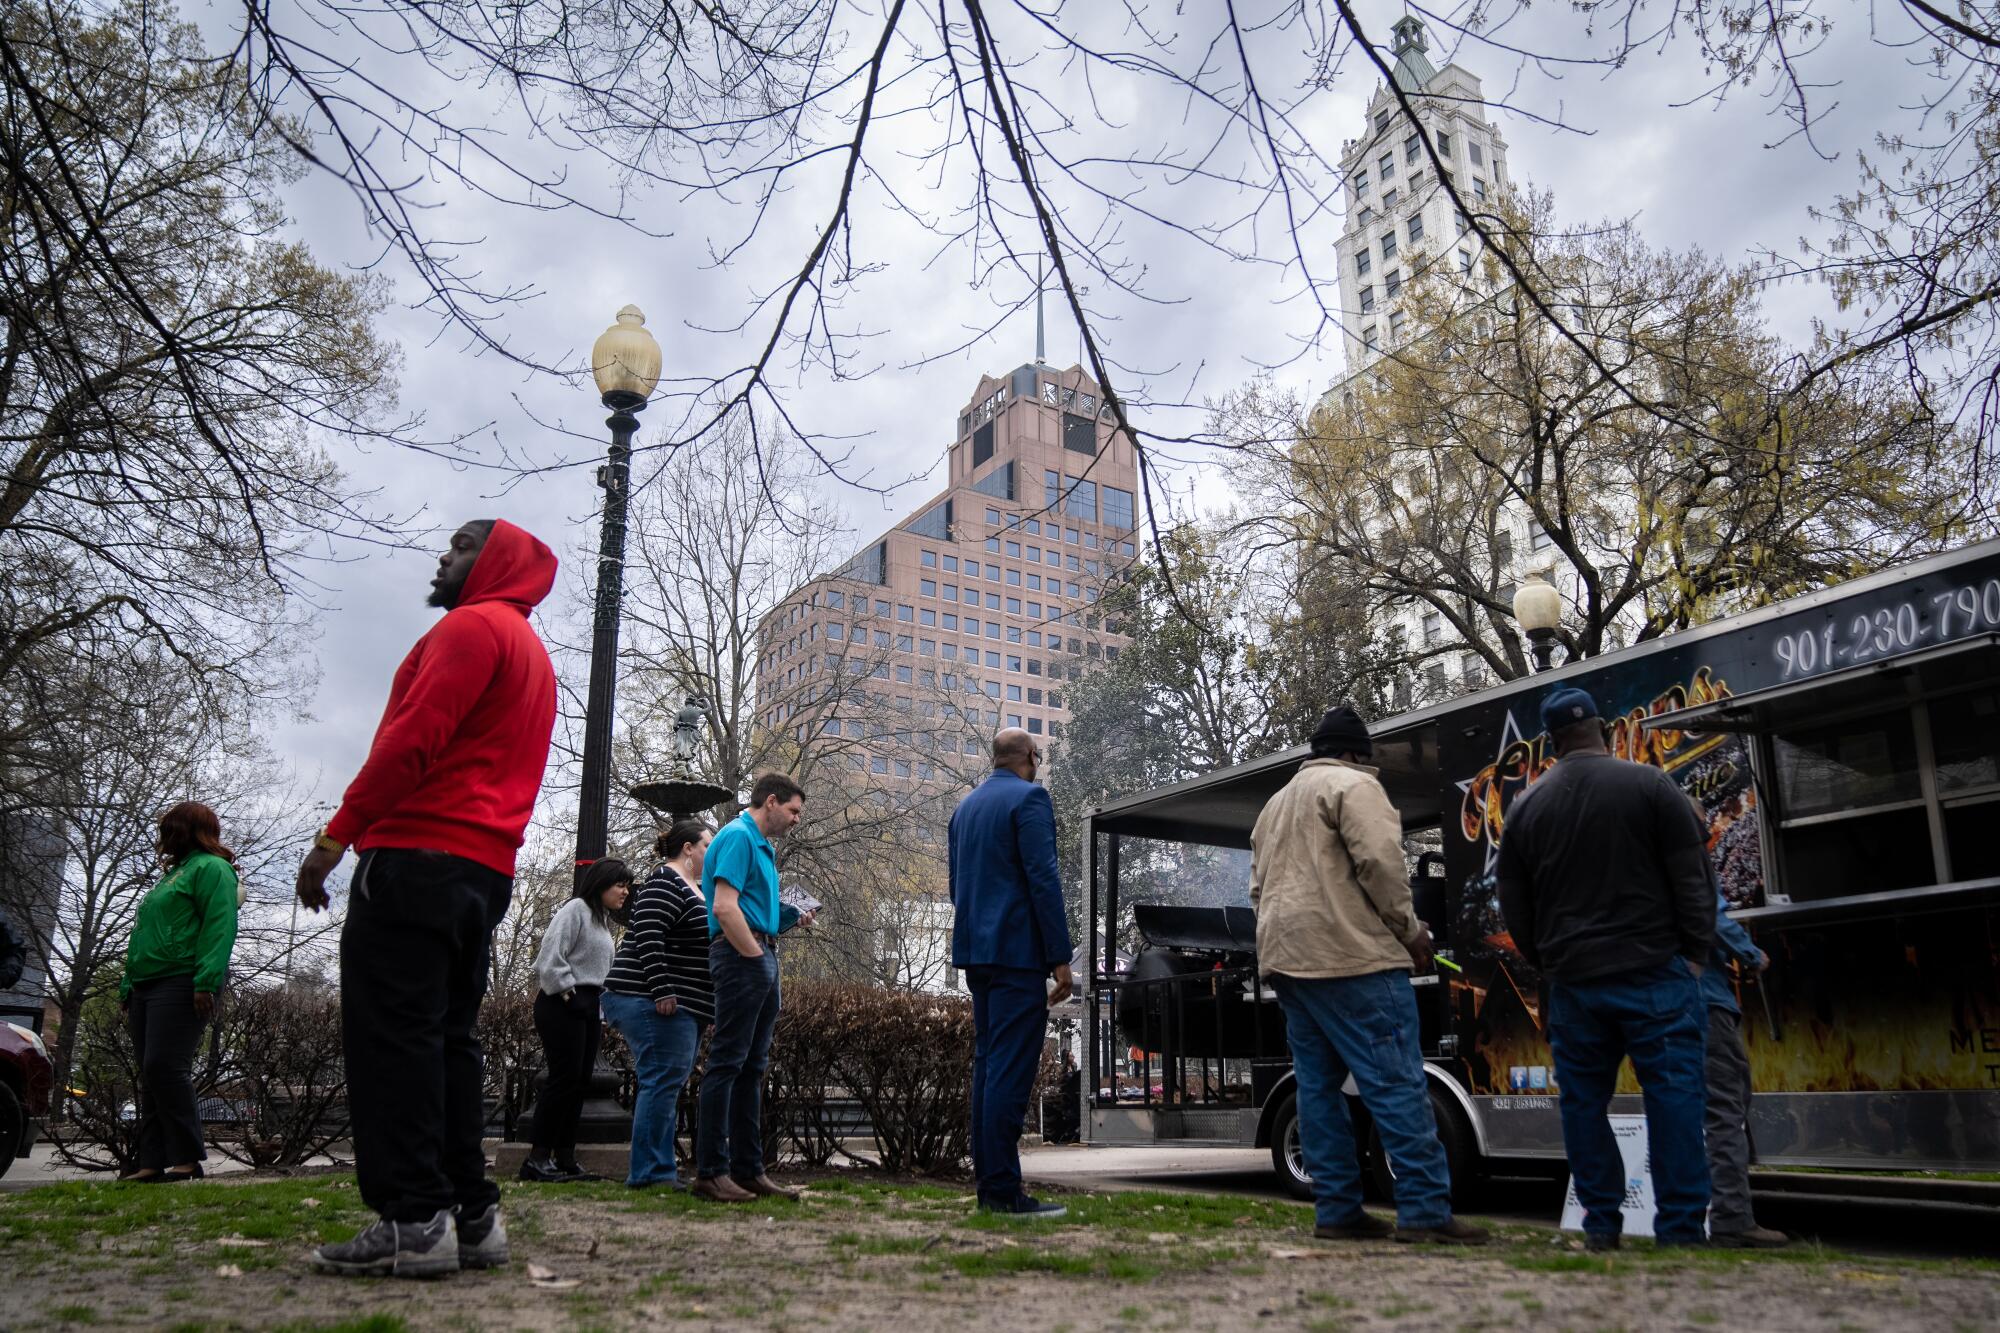 People wait at food trucks in a Memphis park.